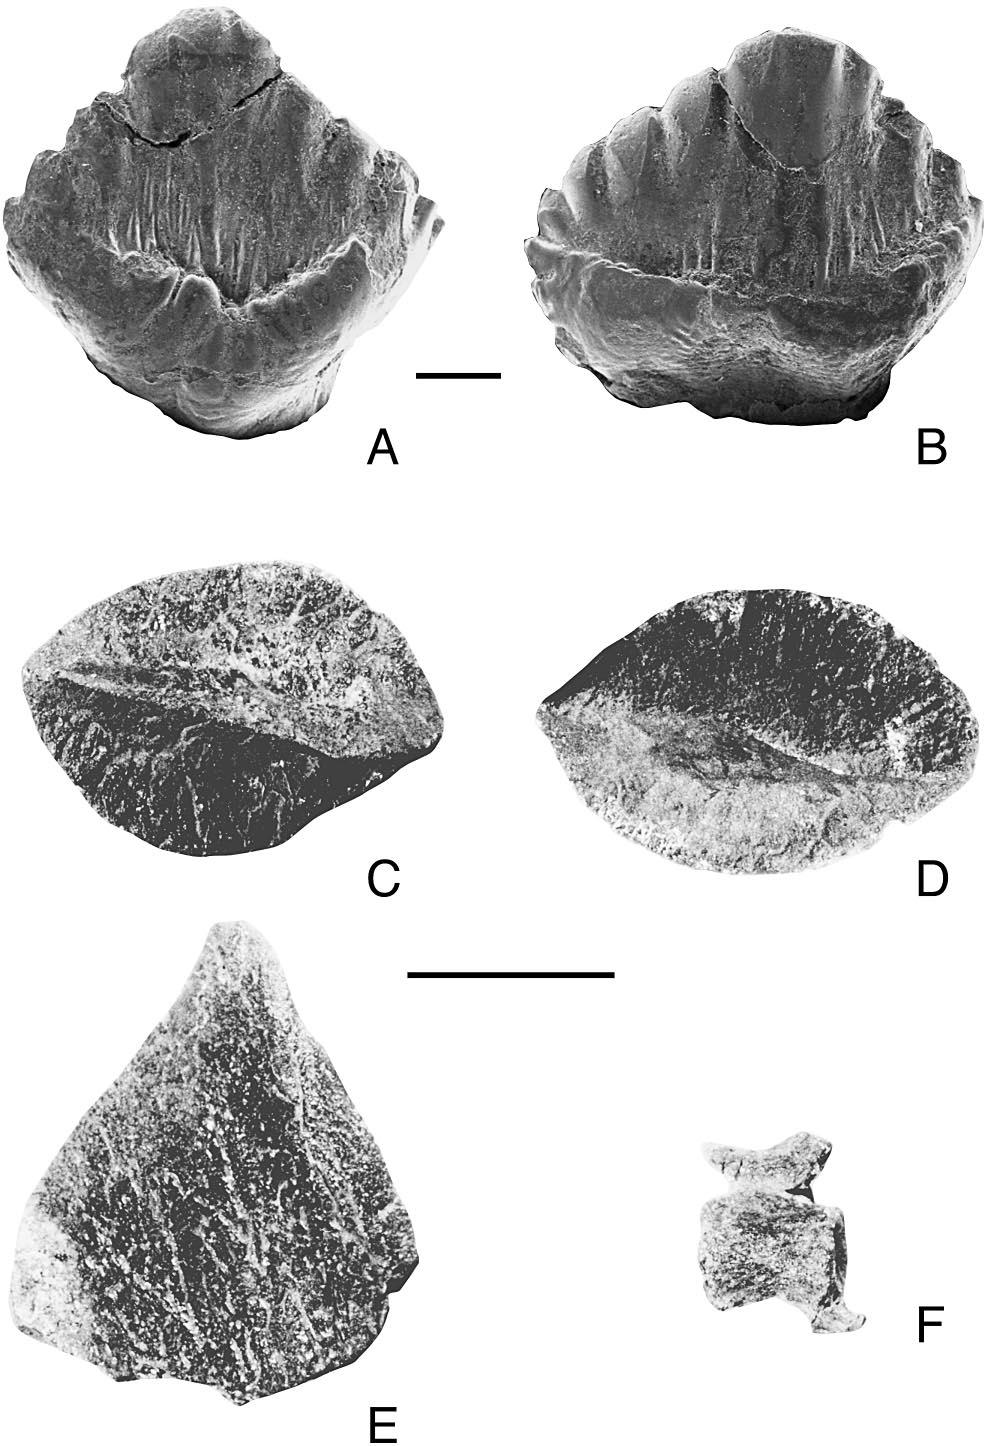 160 JOURNAL OF VERTEBRATE PALEONTOLOGY, VOL. 23, NO. 1, 2003 evidence of dermal armour directly associated with the dorsal surface of the ilia.